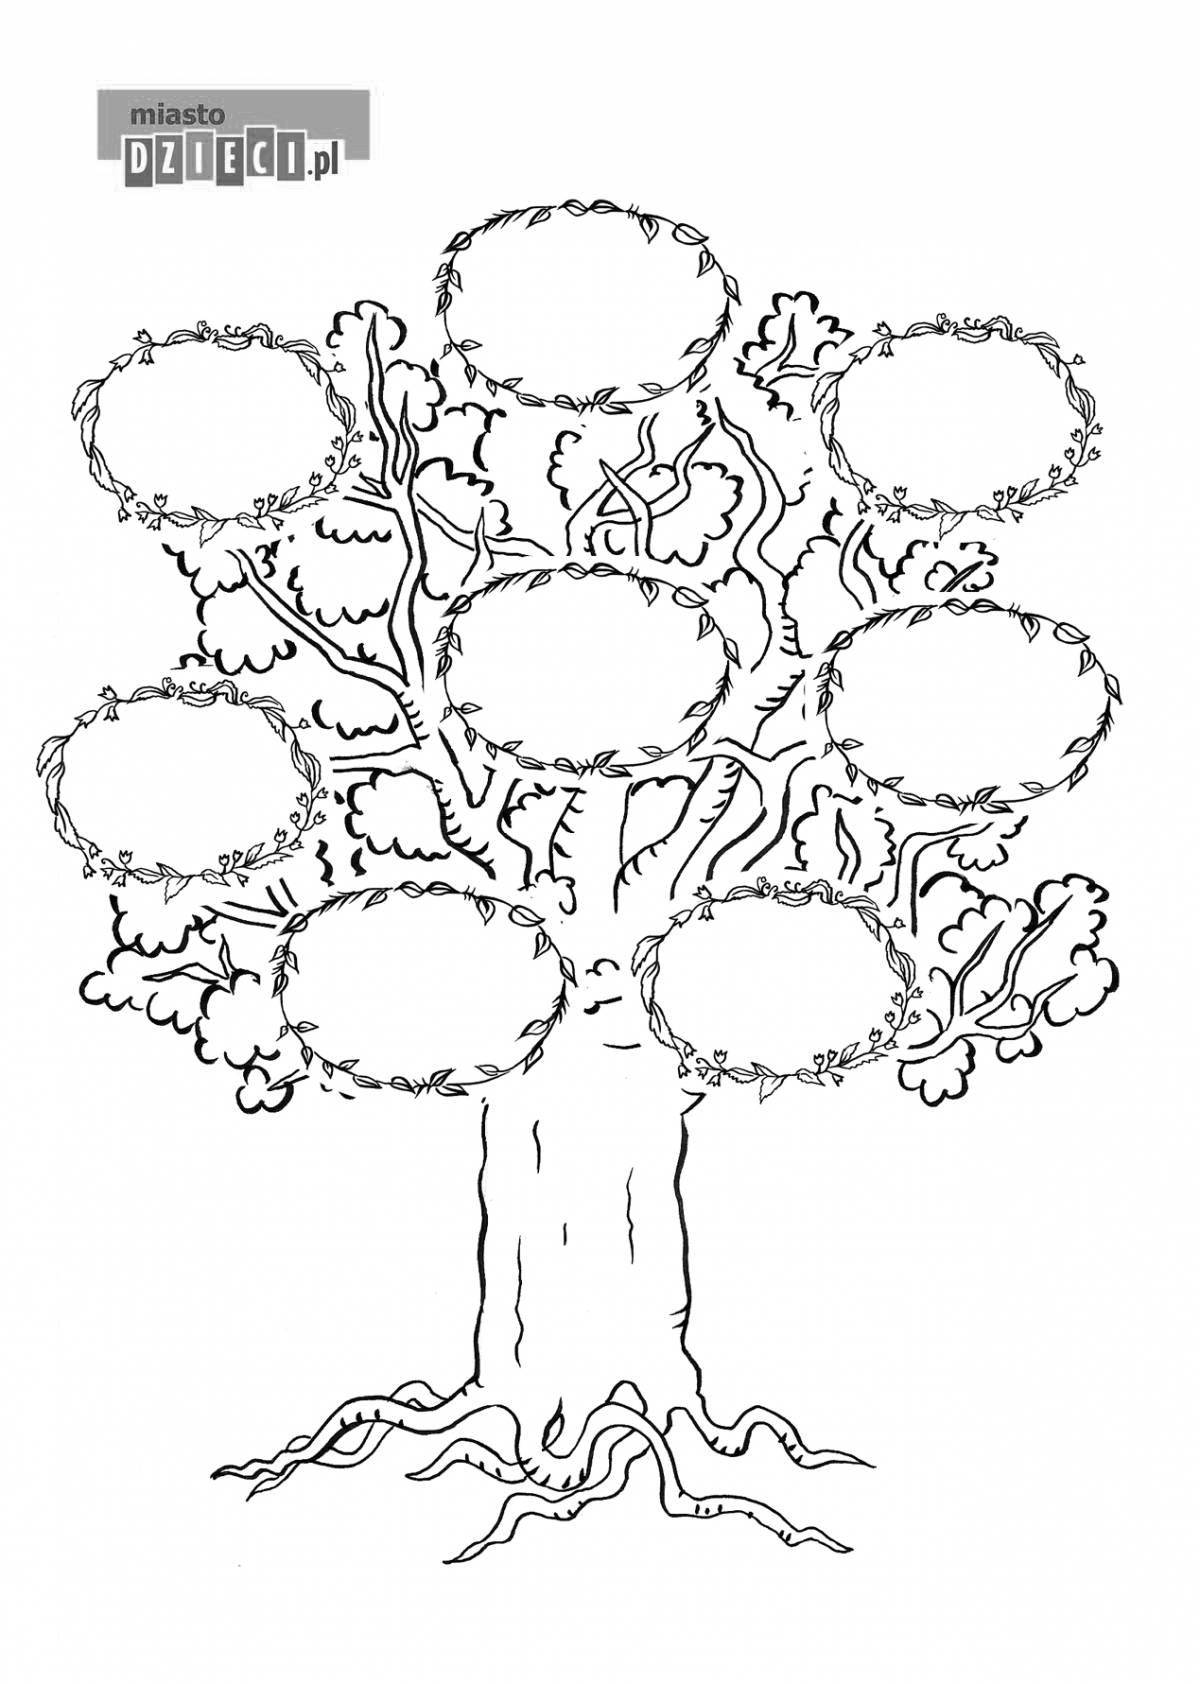 Radiant family tree coloring page